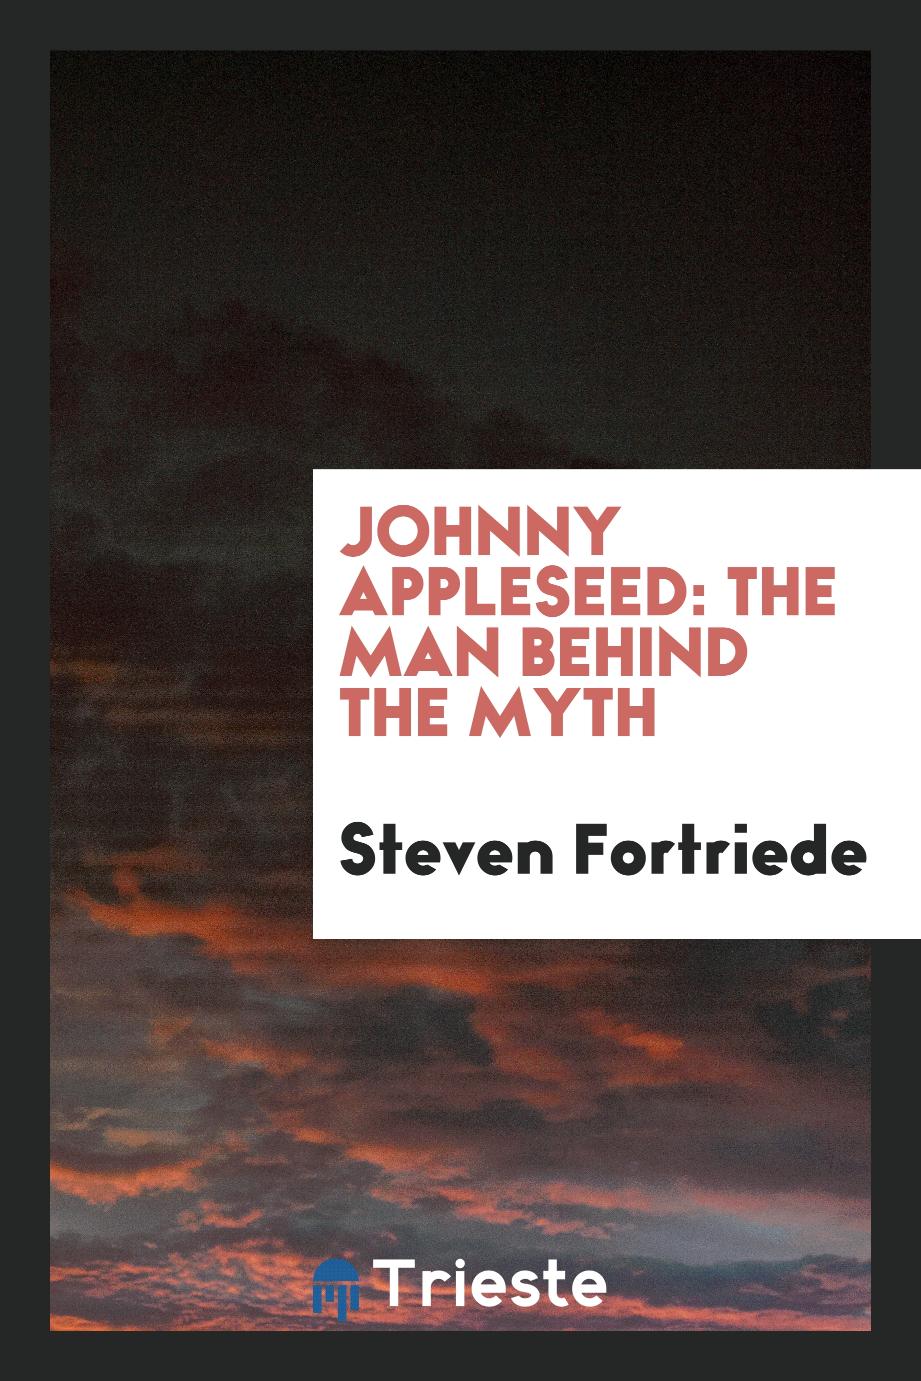 Steven Fortriede - Johnny Appleseed: the man behind the myth